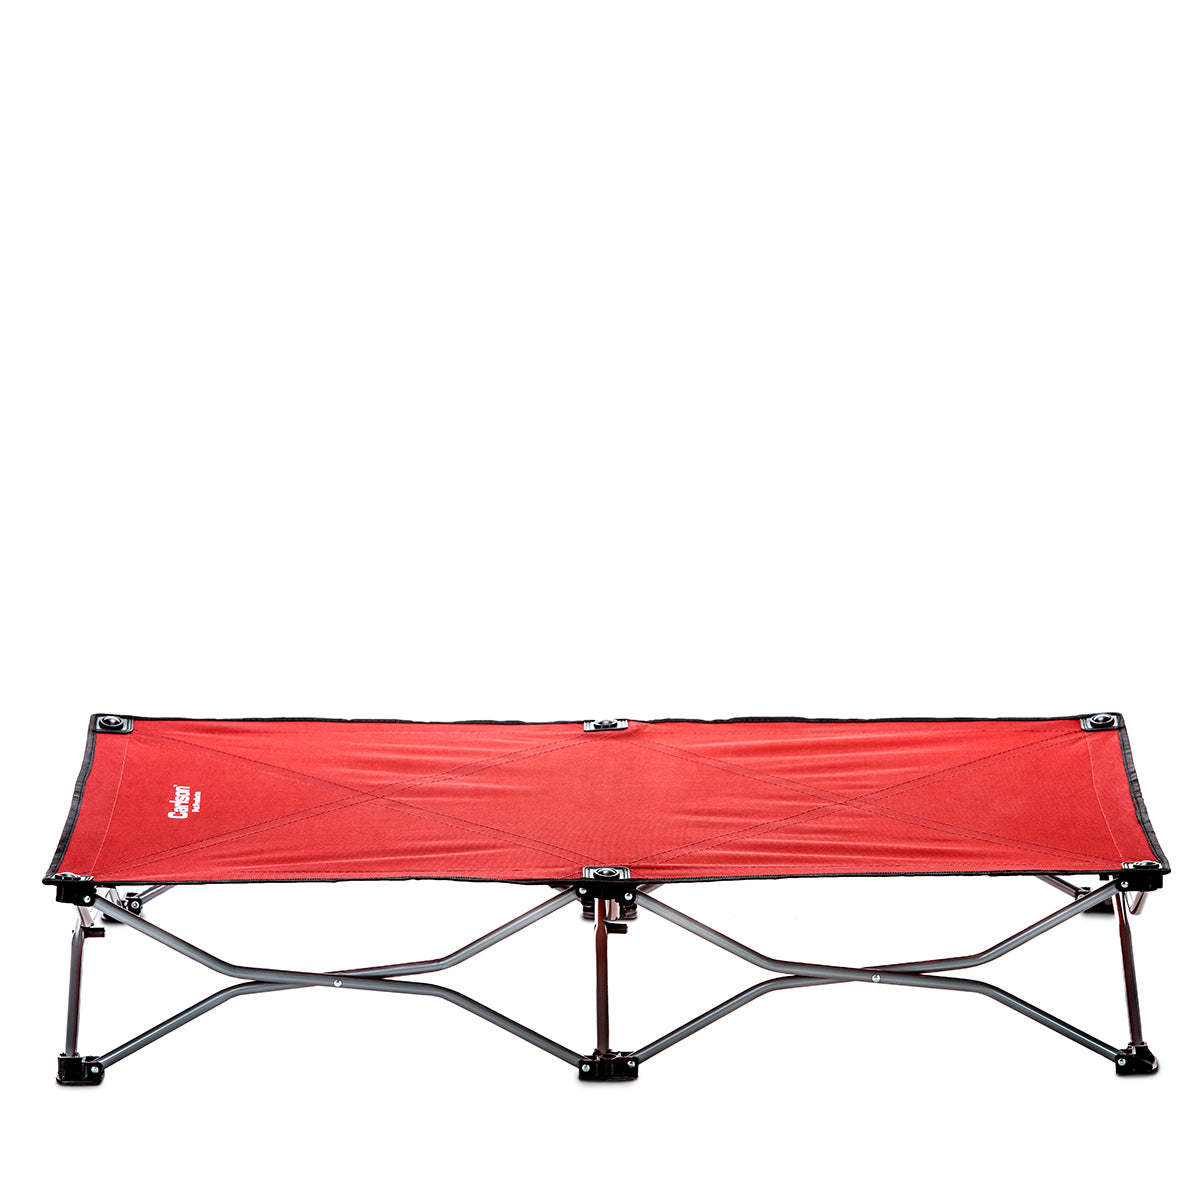 Large Elevated Dog Bed - Red